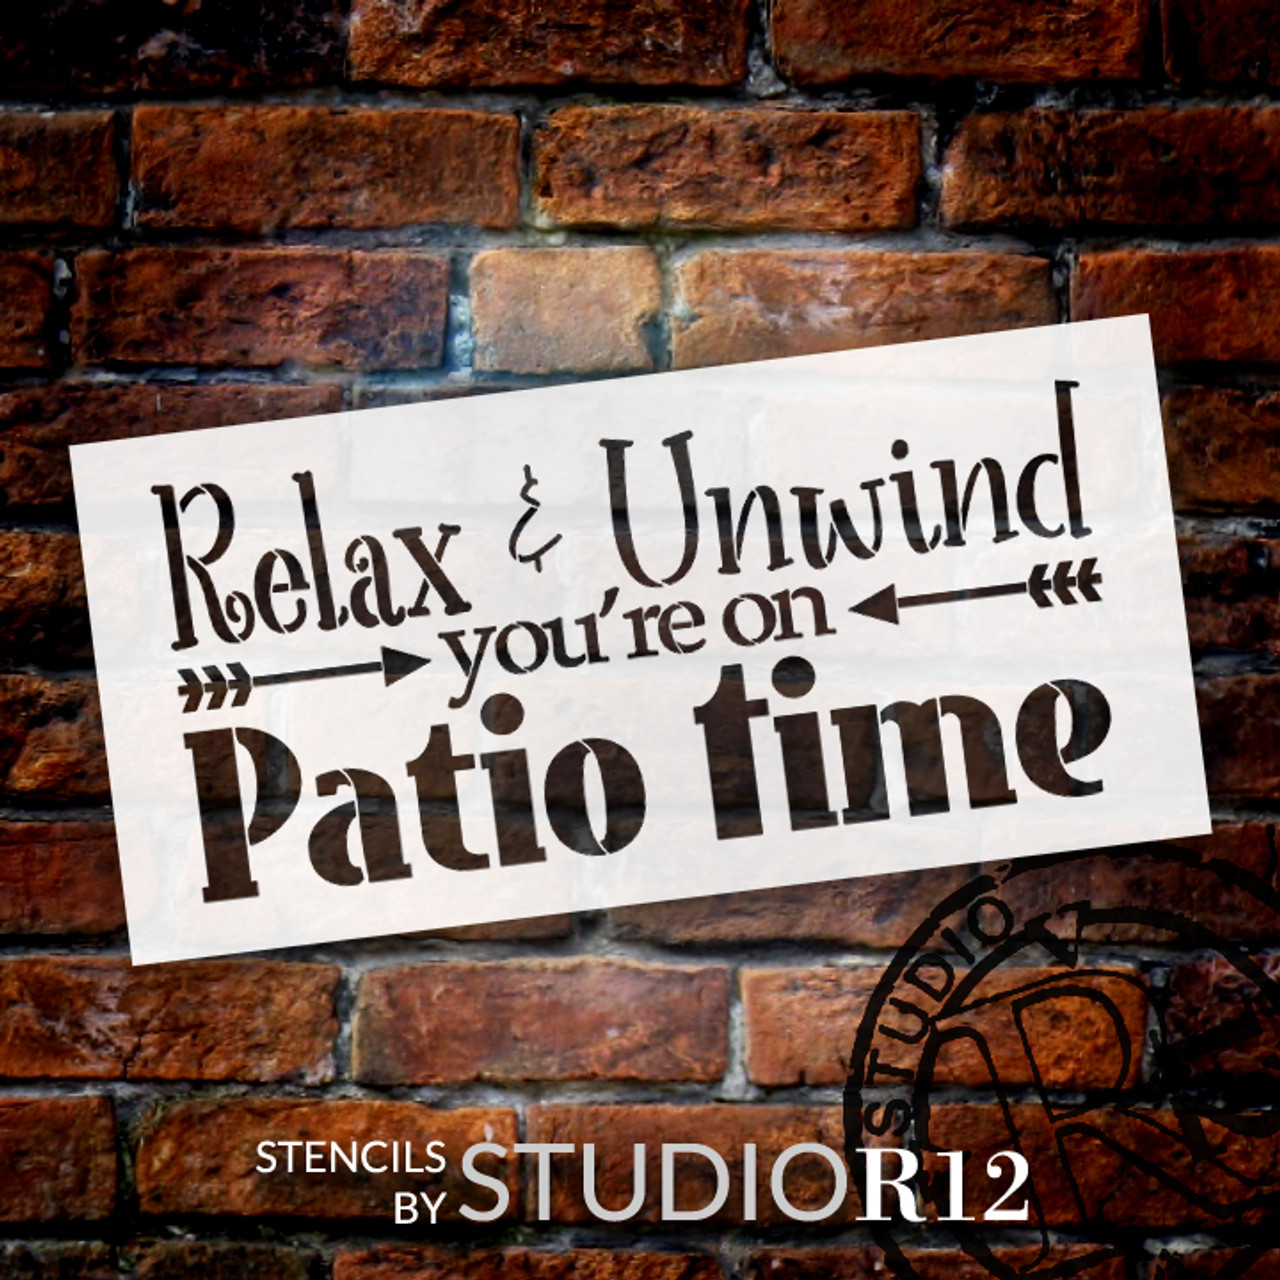 Relax & Unwind You're On Patio Time Stencil by StudioR12 - Inspirational Word Art - 23" x 11" - STCL2444_4